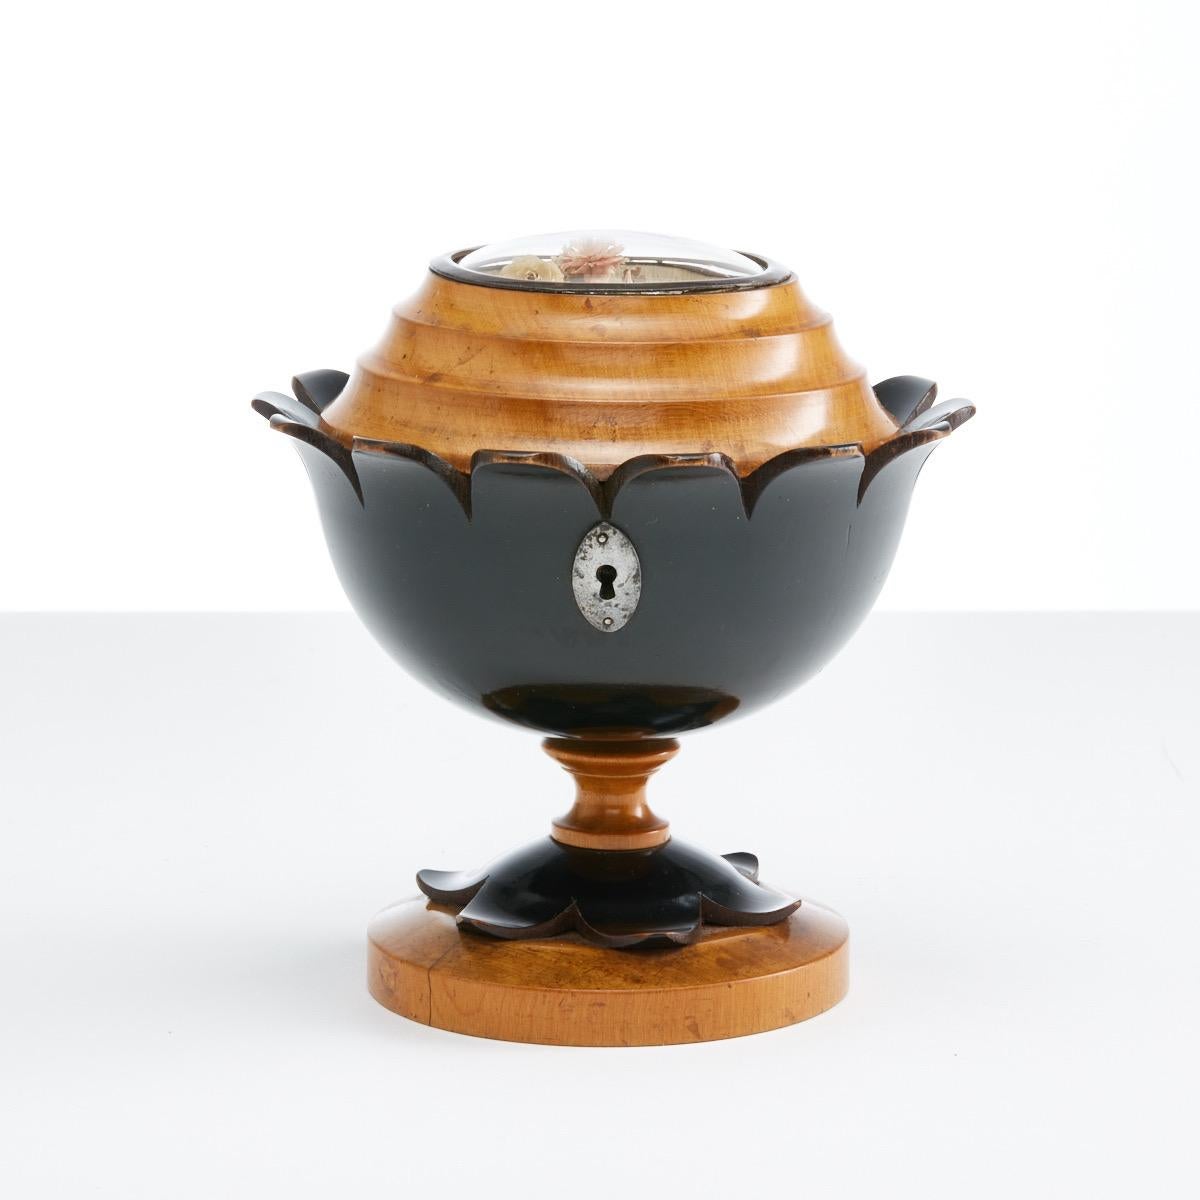 This caddy is in very good condition, it features a glass dome and underneath is a small bouquet of dried flowers.
The exterior is very fine quality boxwood and it sits within a stained ebony base replicating leaves. Like so many tea caddy’s of